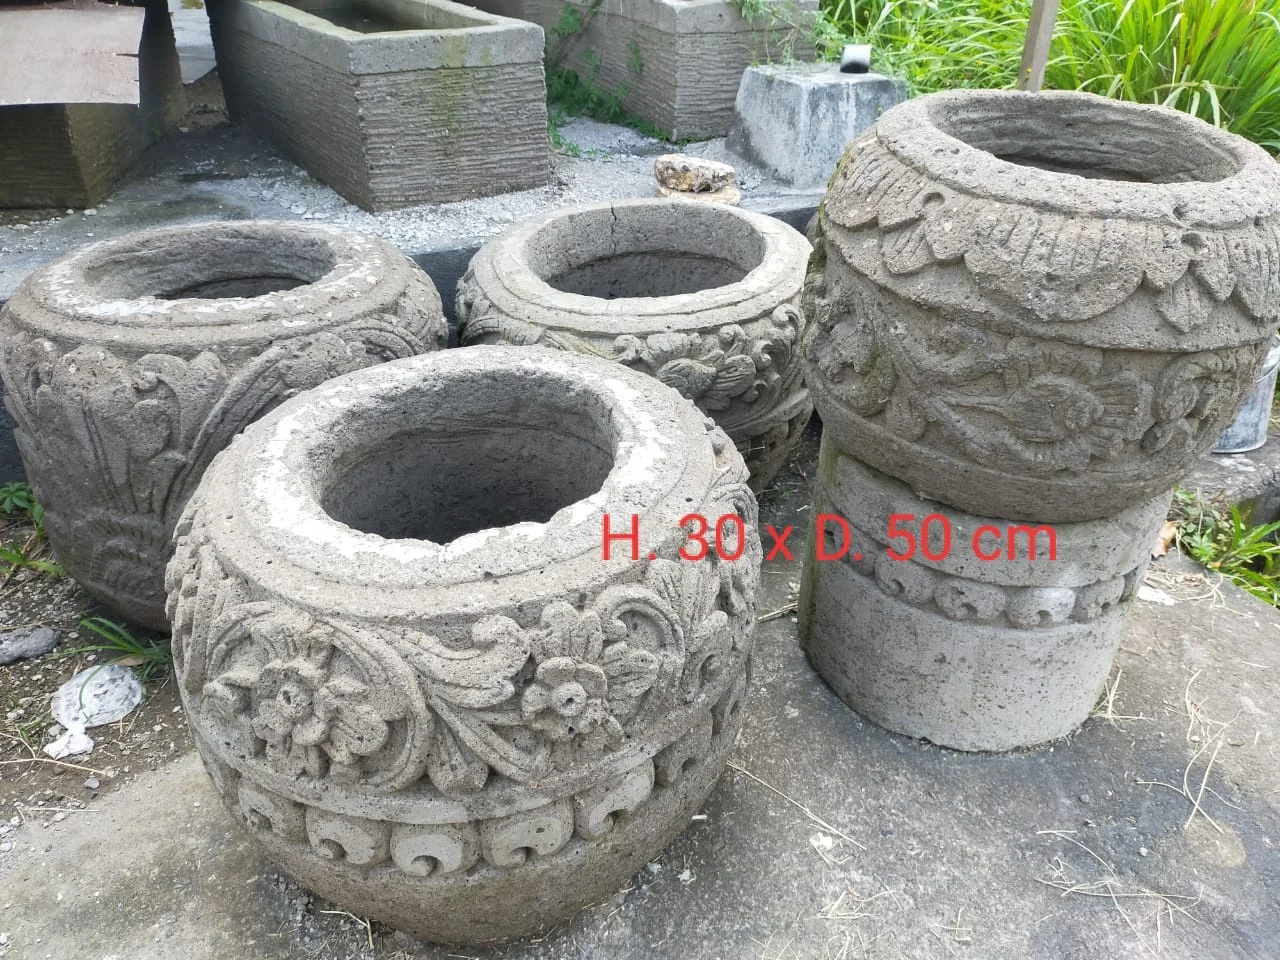 Balinese Stone Plant Pots for Sale